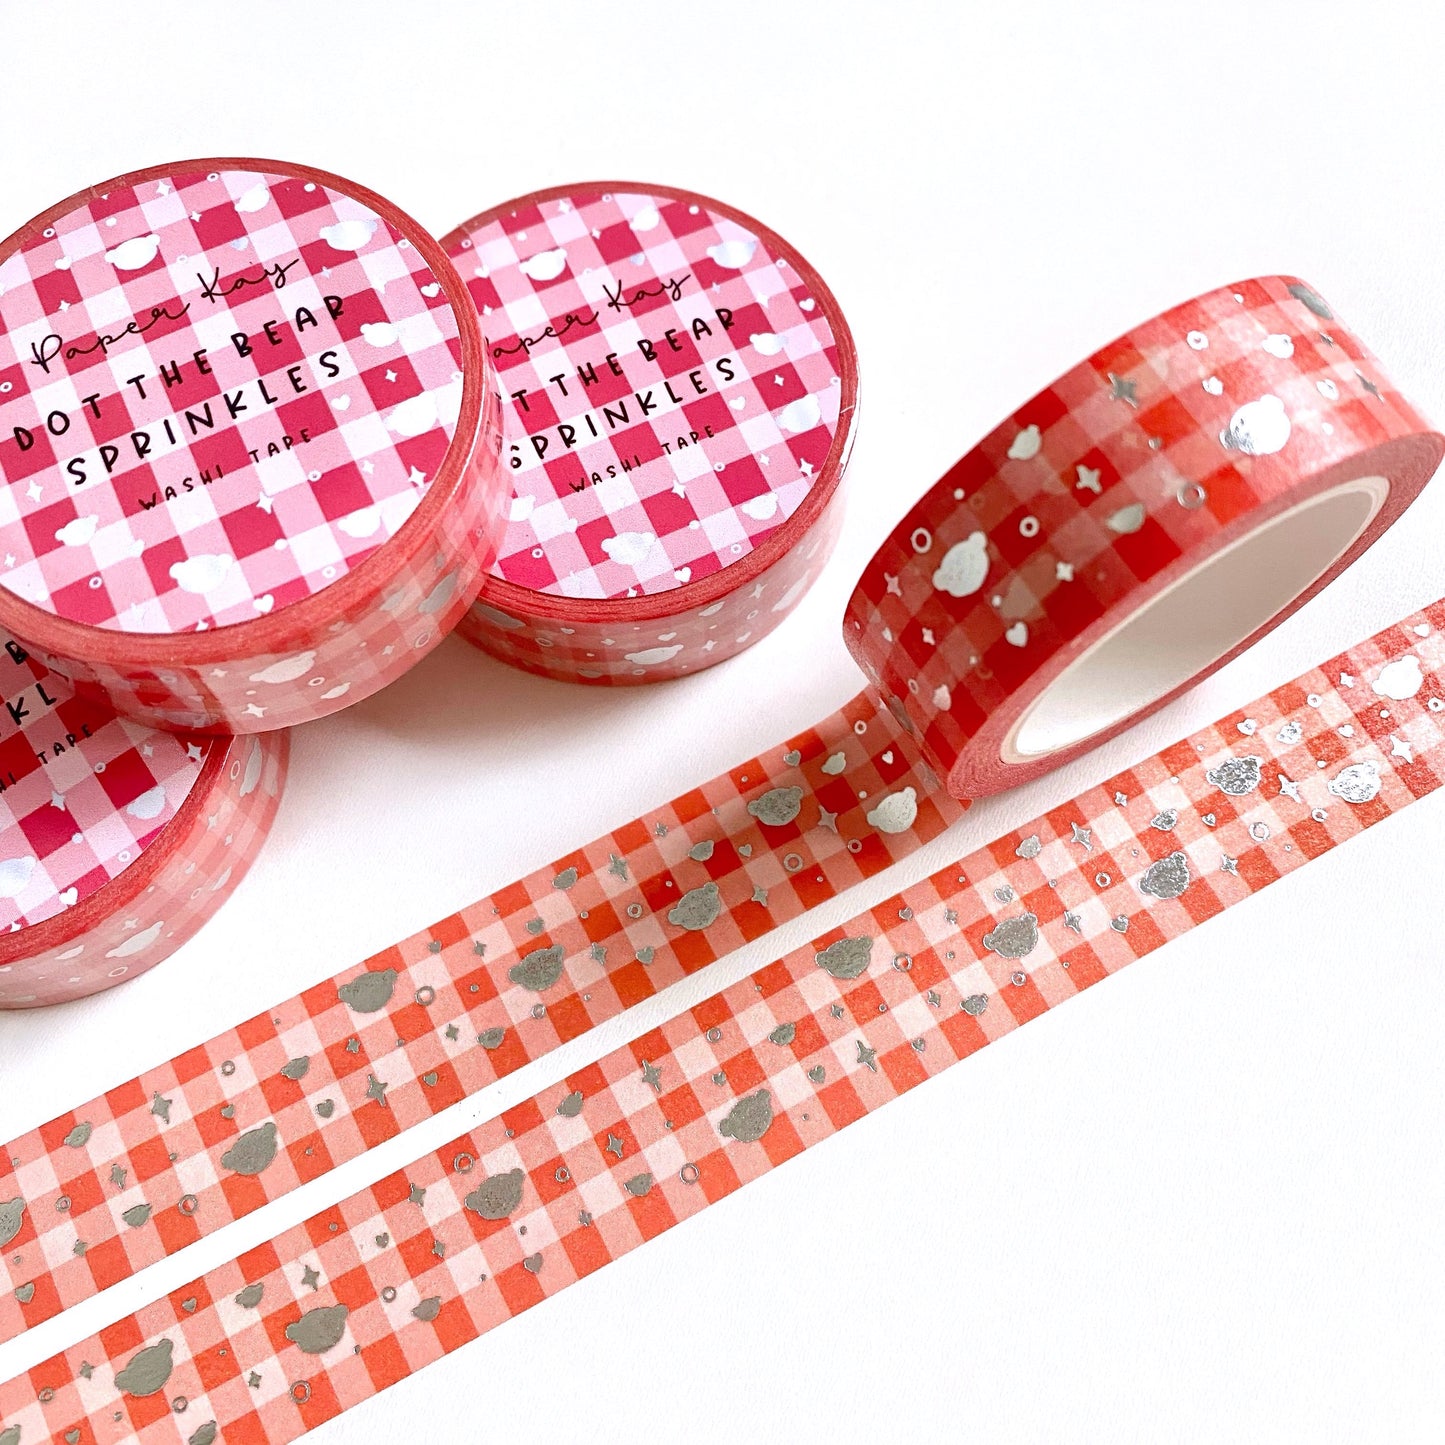 Red Gingham Dot the Bear Sprinkles Washi Tape | Silver Foiled | Happy Holidays Collection